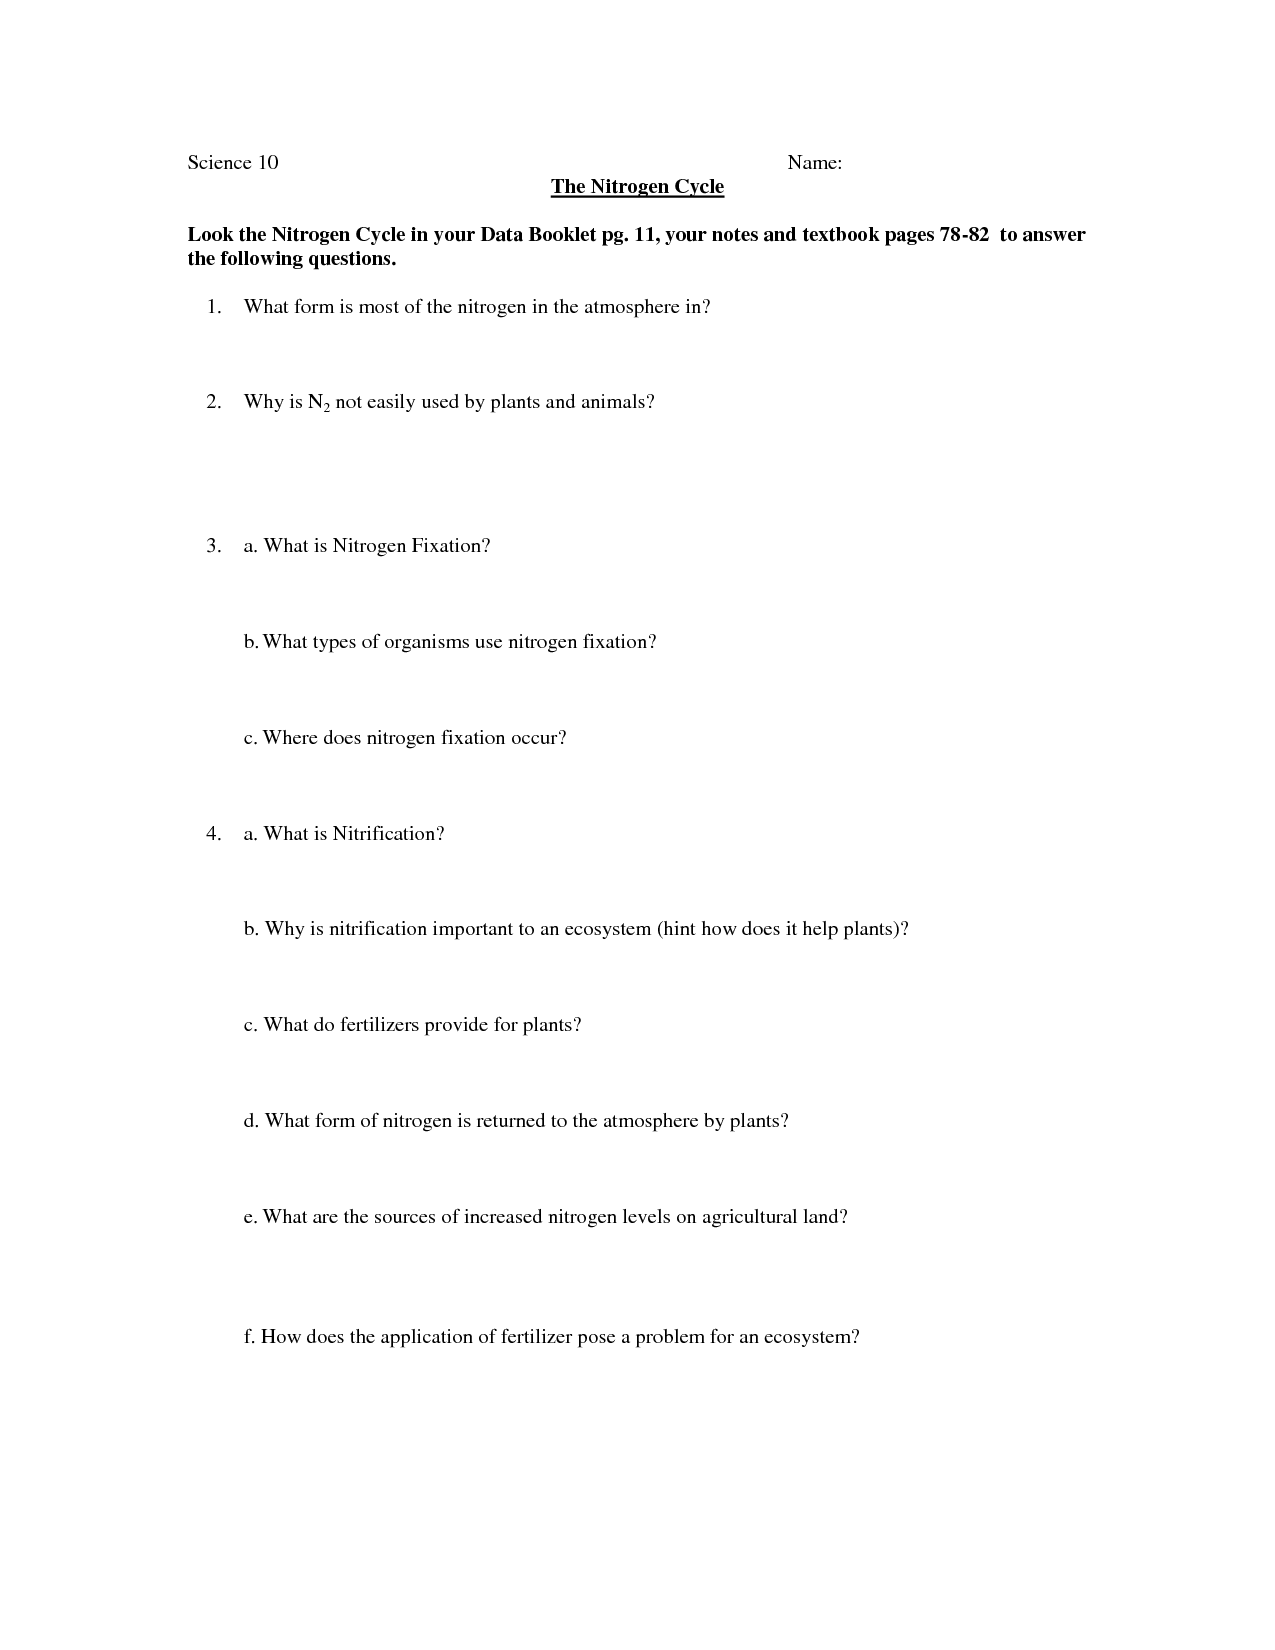 17-best-images-of-nitrogen-cycle-worksheet-middle-school-carbon-cycle-worksheet-answer-key